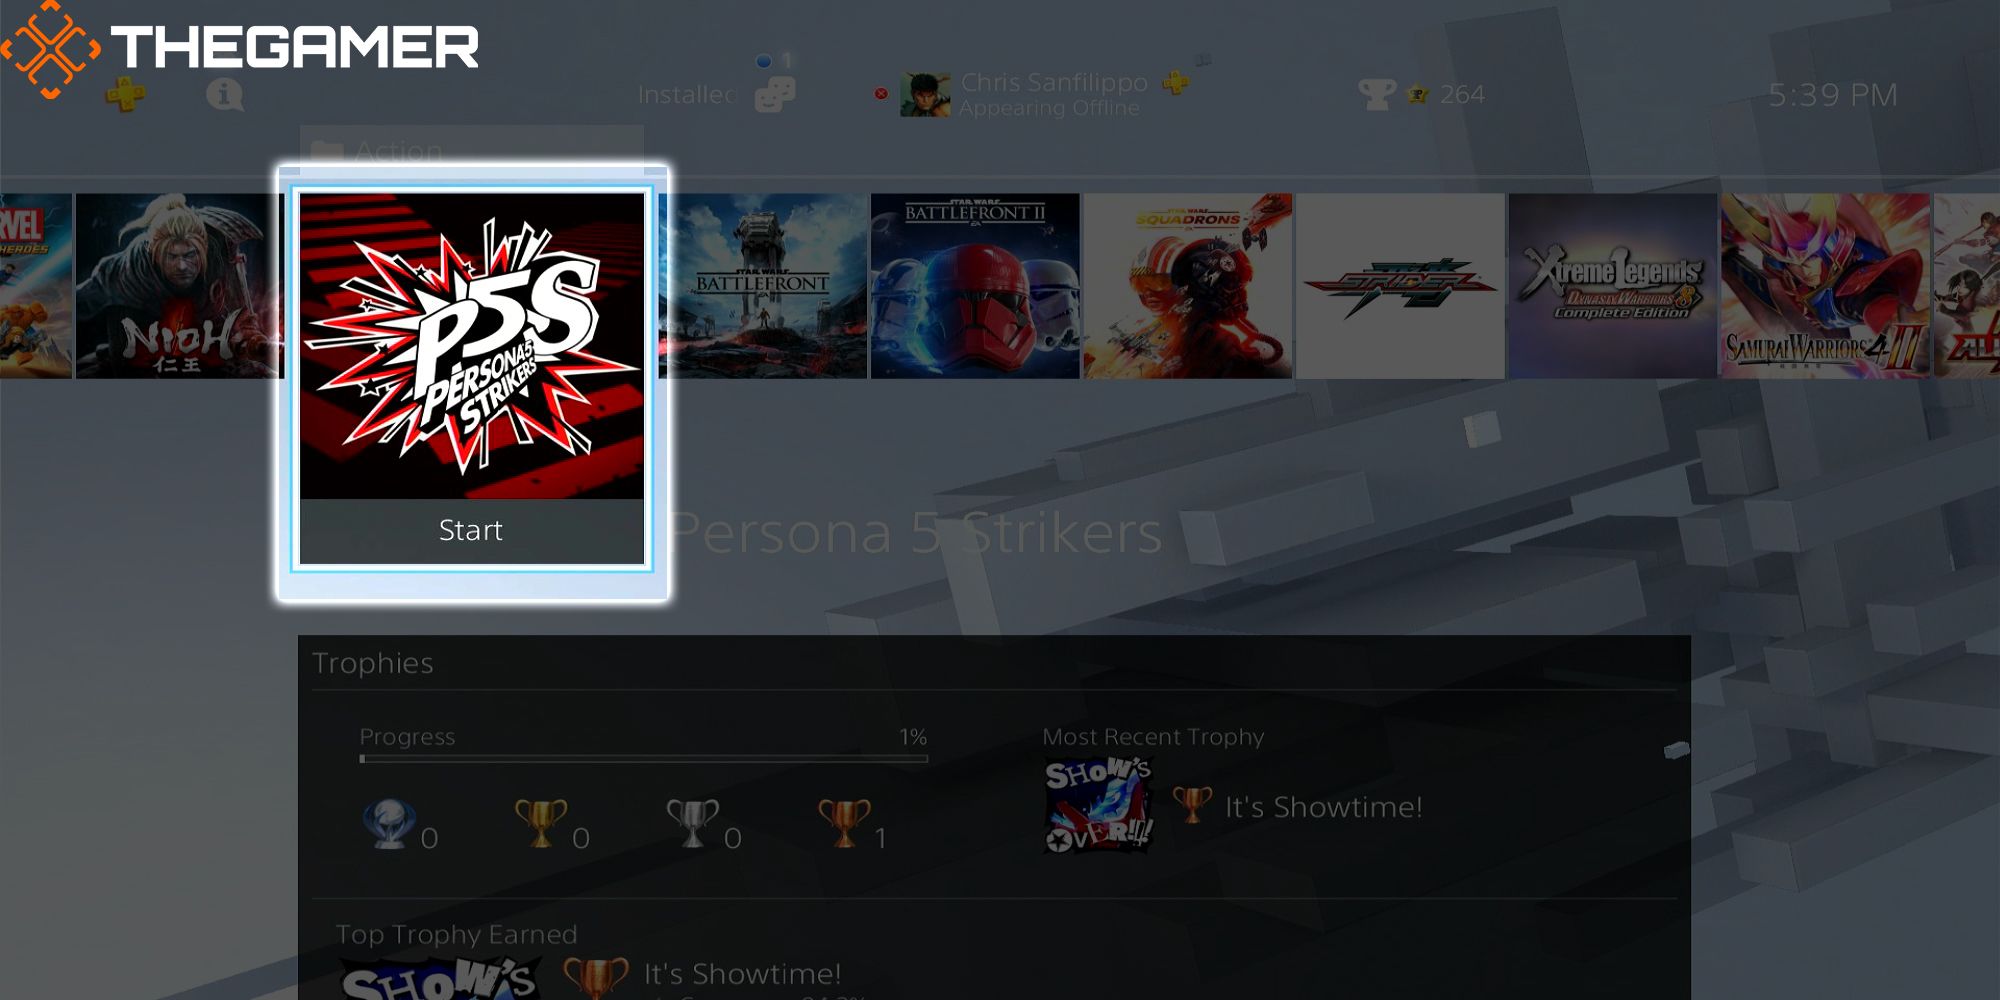 The Persona 5 Strikers Start Icon, in the Action Folder of Chris's Sad PS4 Home Page.